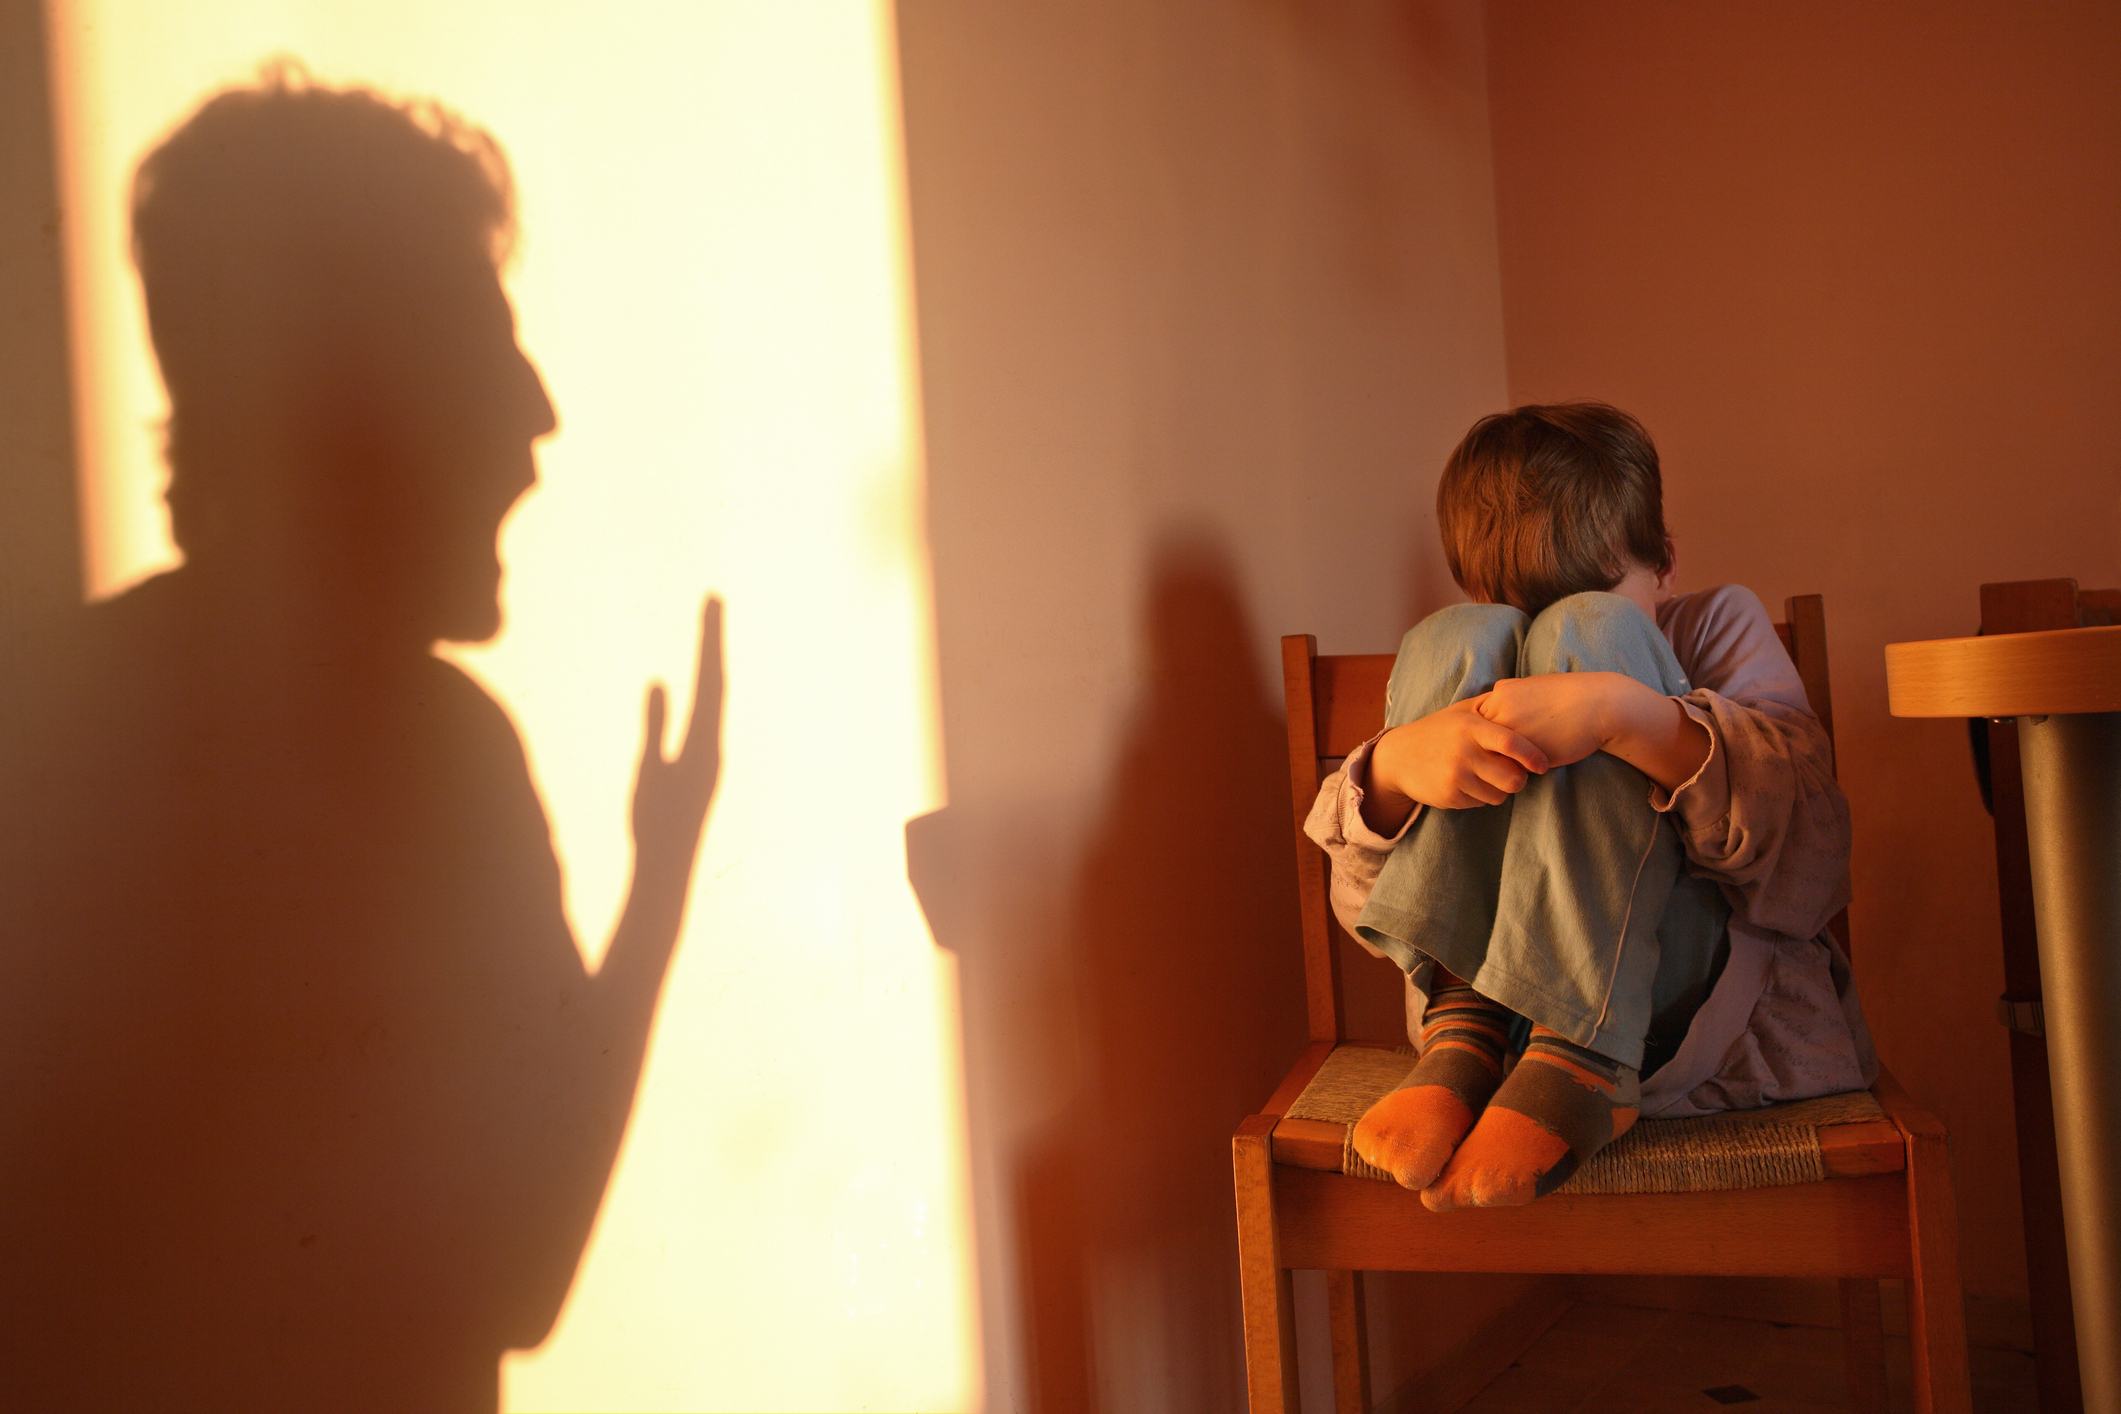 Adult silhouette appears to scold a child sitting with head down, indicating a disciplinary moment